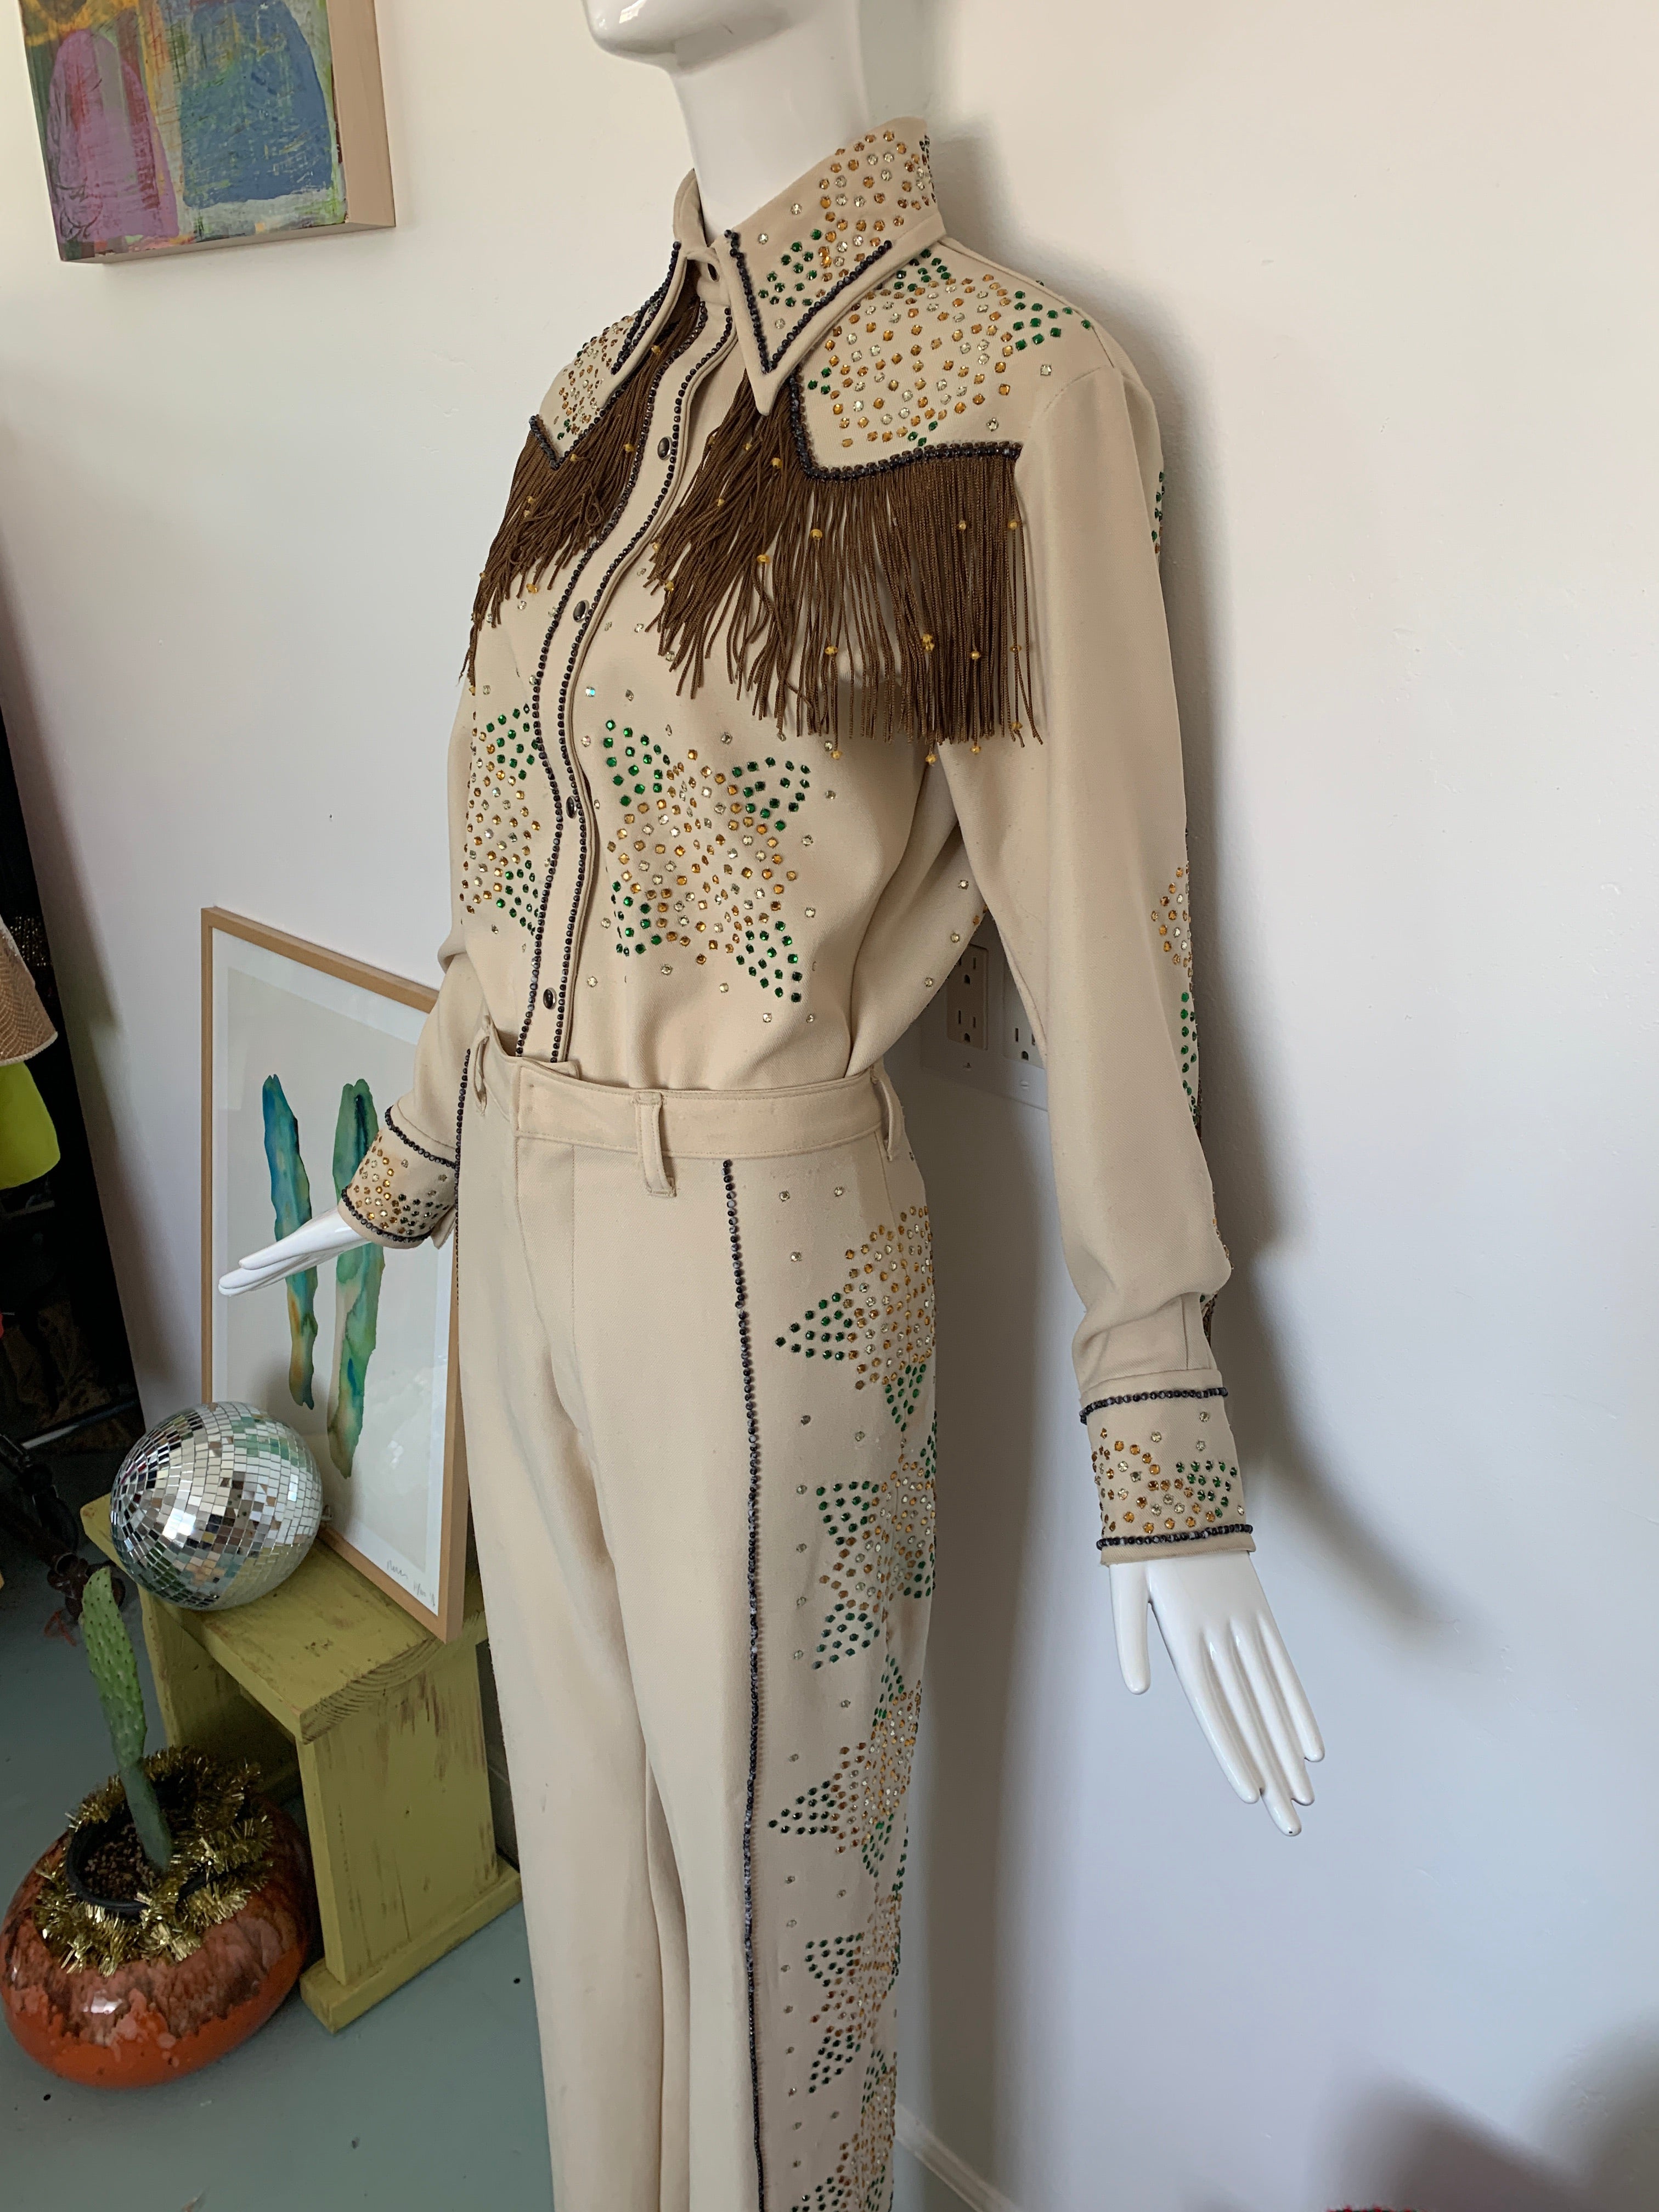 Collectible Nudie Style Western Suit